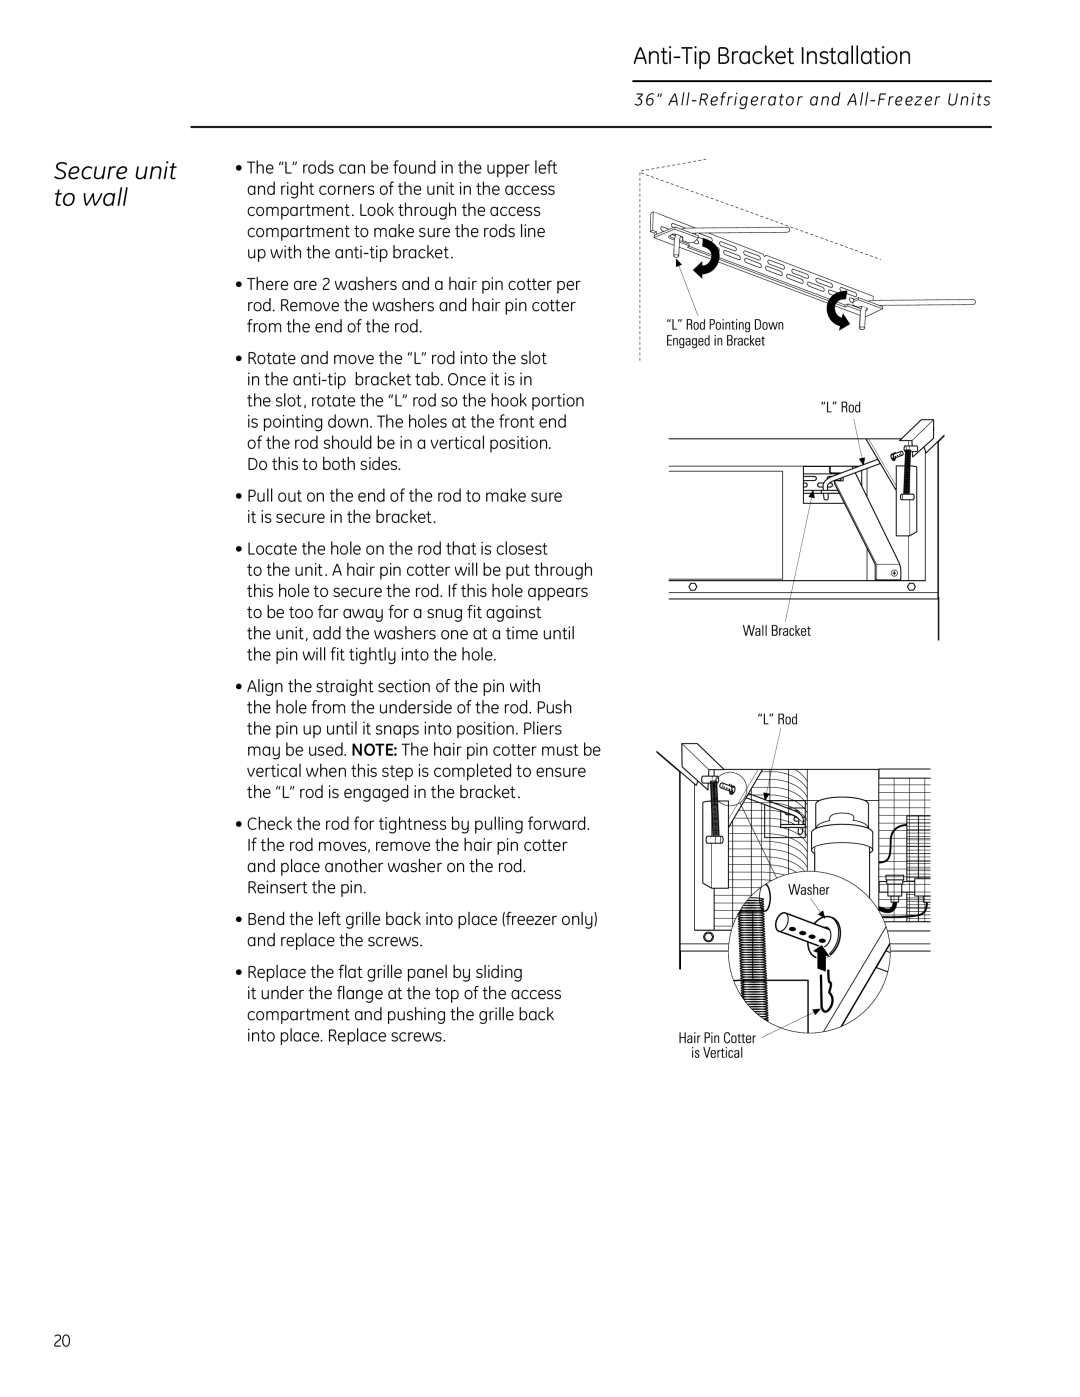 GE Monogram All-Refrigerators and All-Freezers owner manual Secure unit to wall, Anti-Tip Bracket Installation 